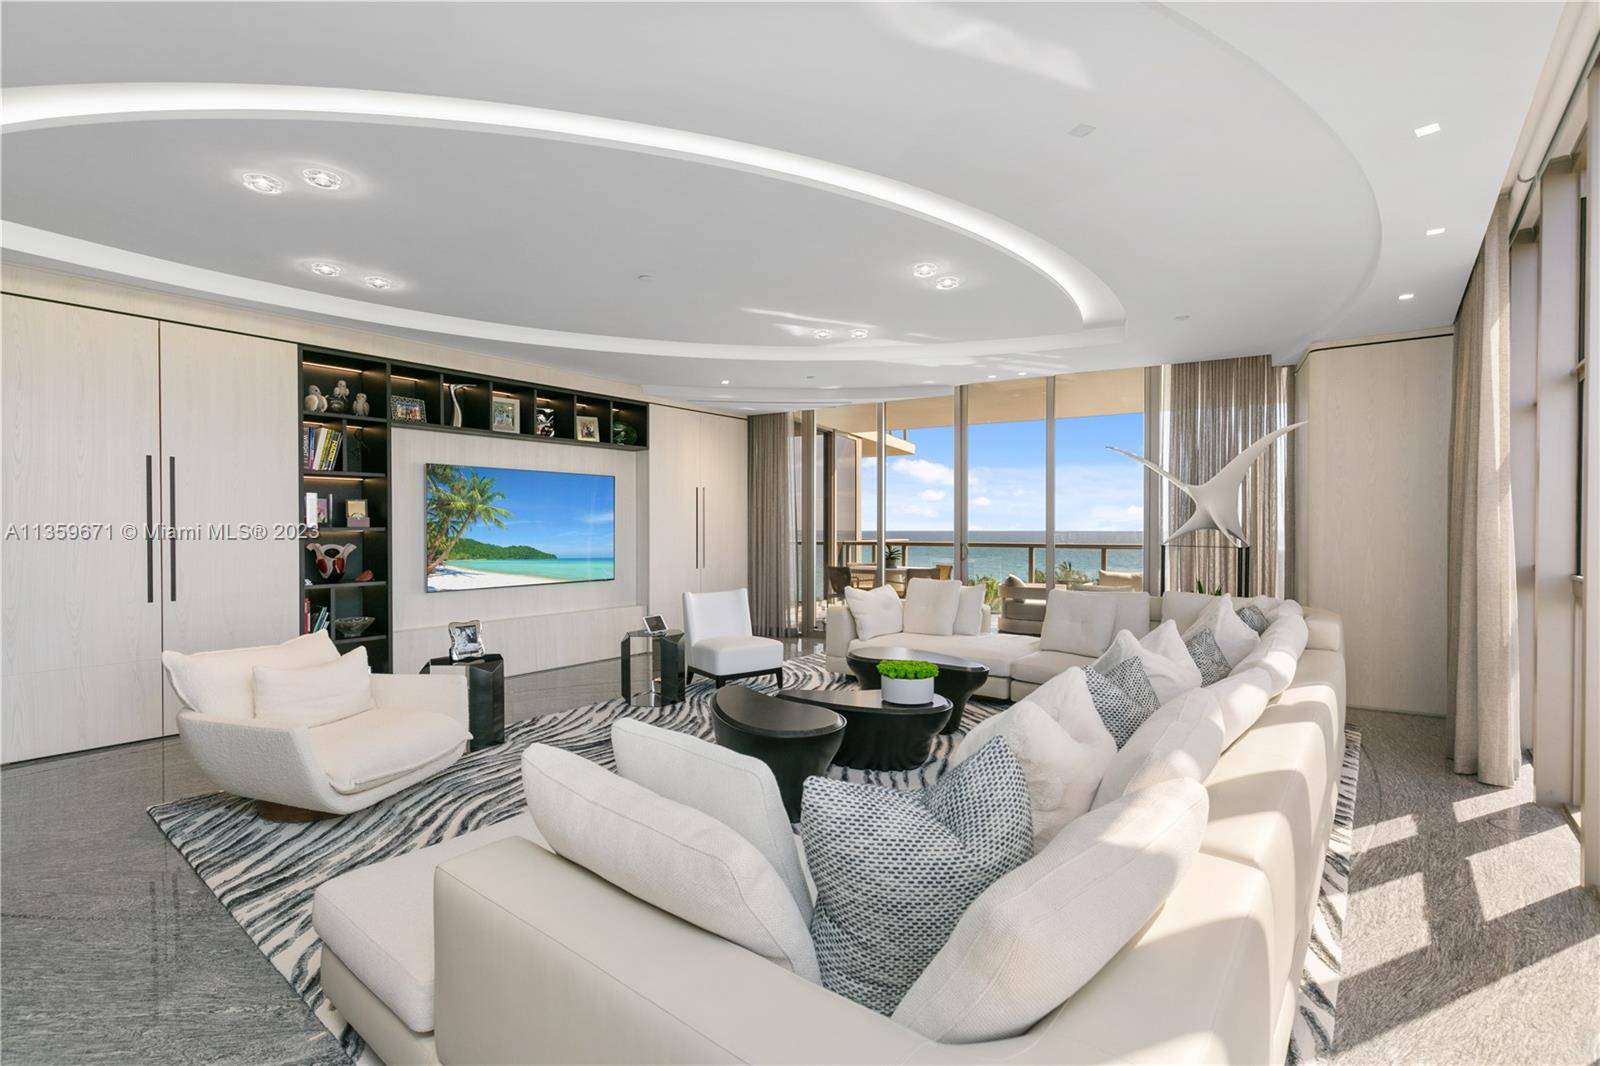 Nestled in the heart of Miami s most prestigious oceanfront enclave, St Regis Bal Harbour rises from the turquoise waters of the Atlantic sitting along its white sand beaches where ...